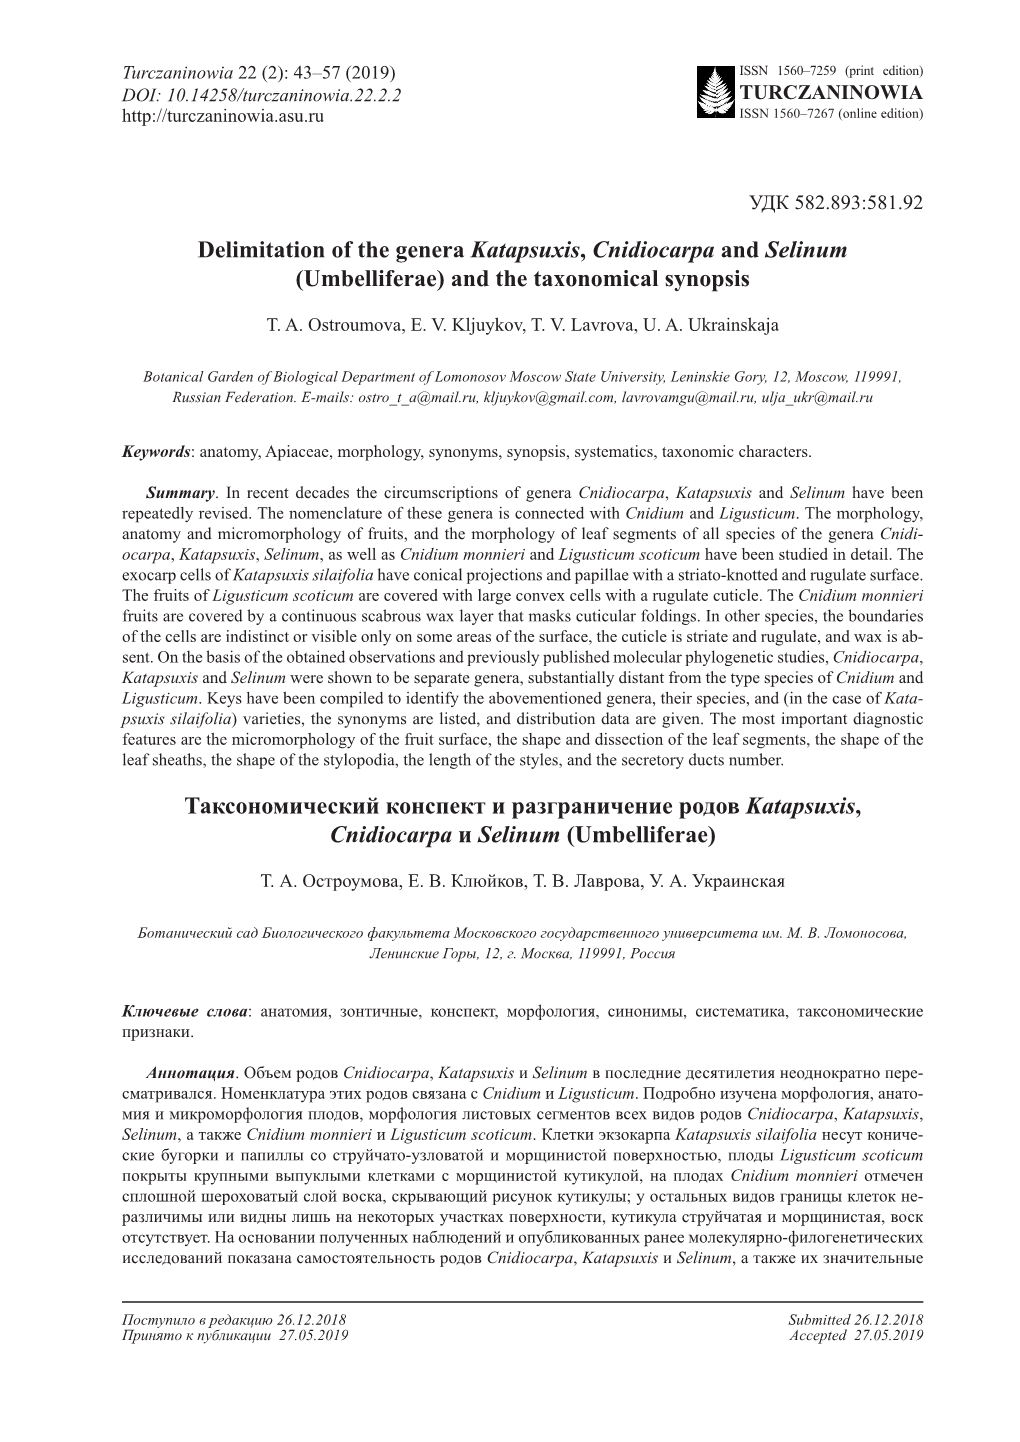 Delimitation of the Genera Katapsuxis, Cnidiocarpa and Selinum (Umbelliferae) and the Taxonomical Synopsis